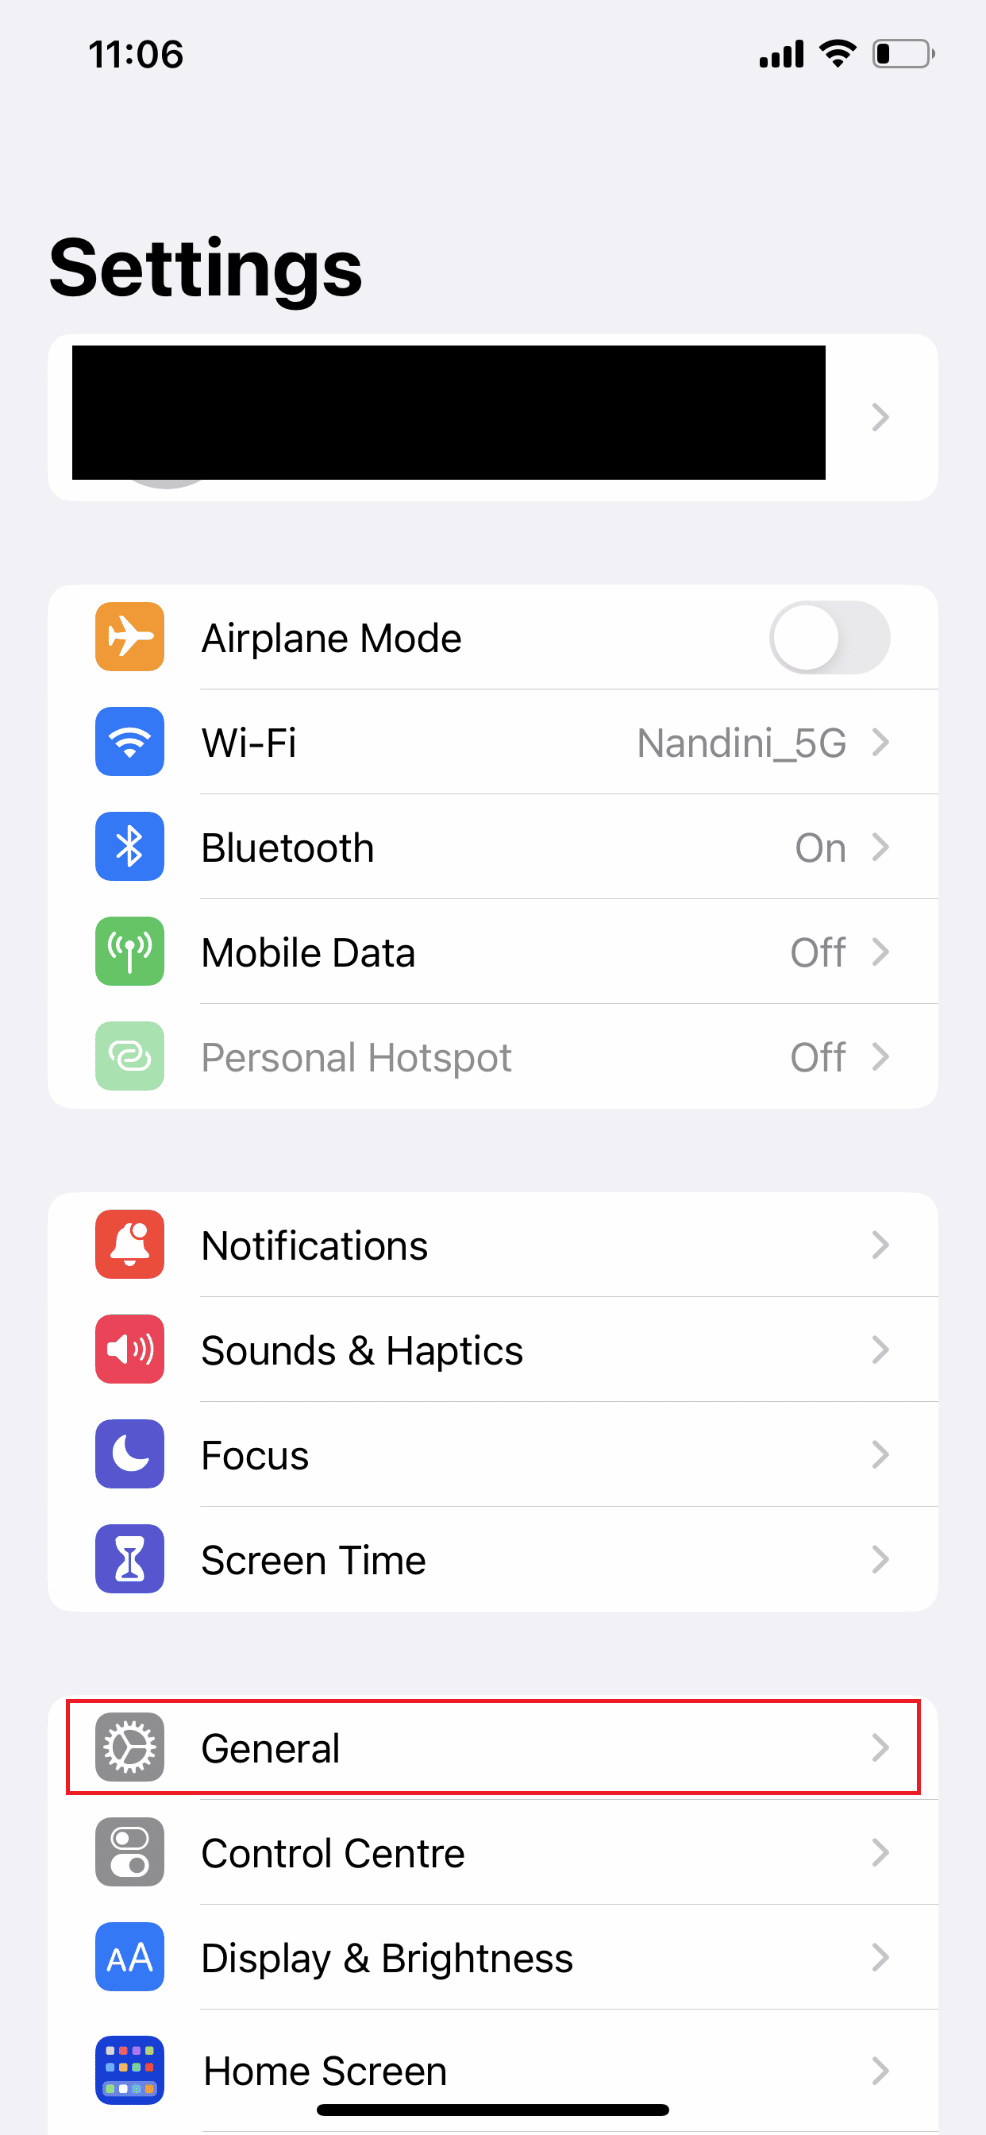 Select General | How Do I Fix Slow Internet on My iPhone